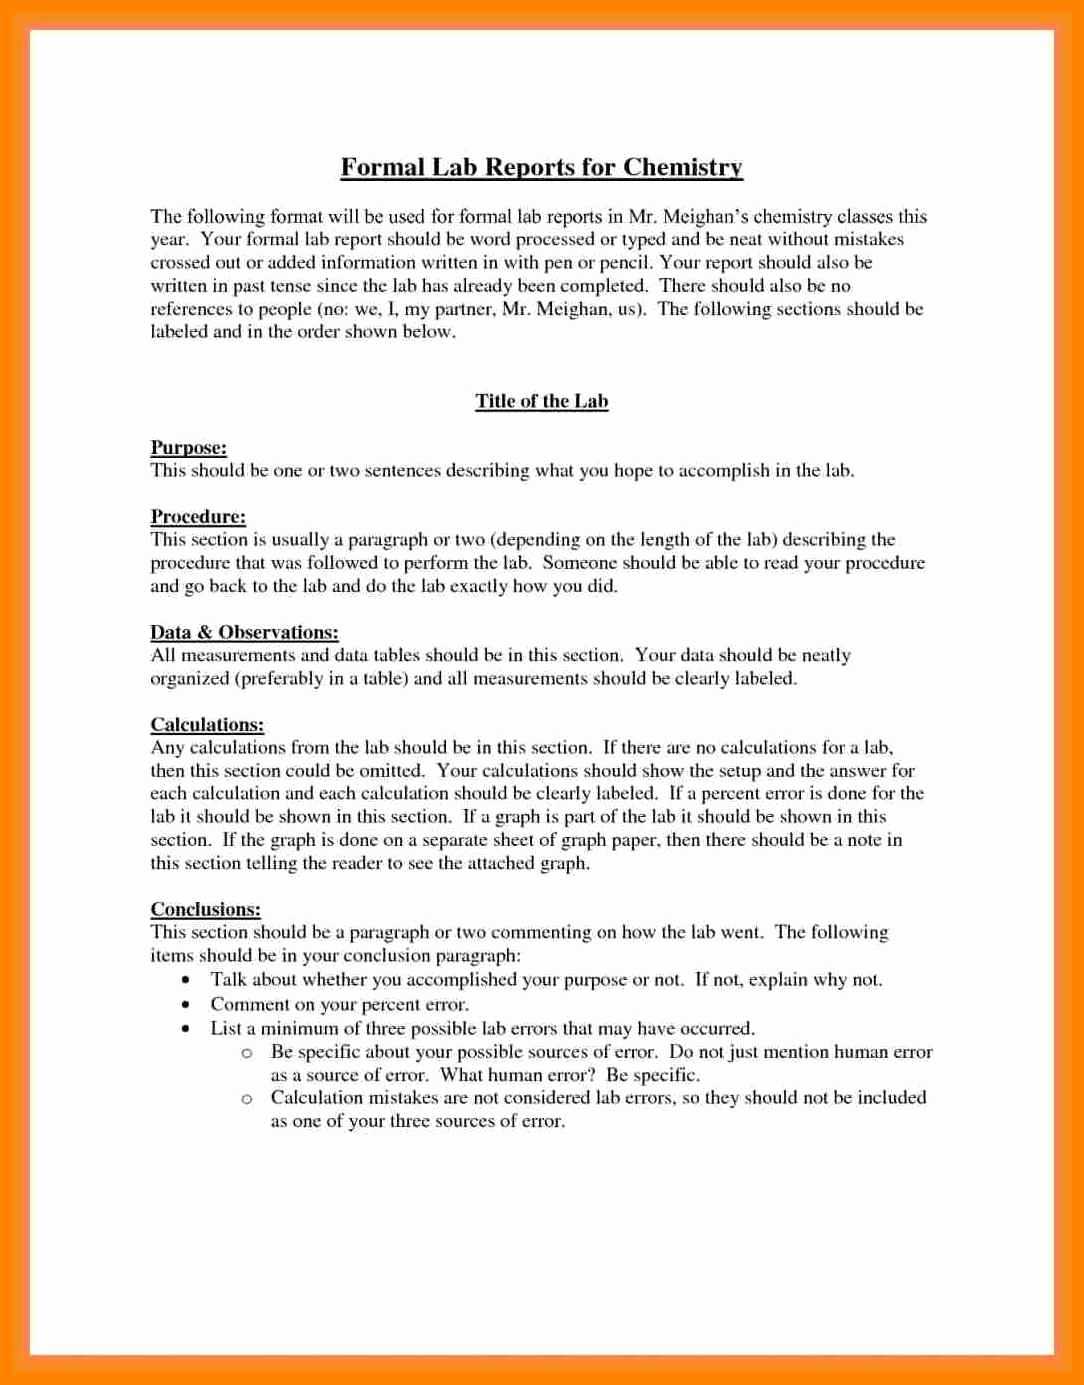 003 Formal Lab Report Example Best Write Up Template Of Within Chemistry Lab Report Template